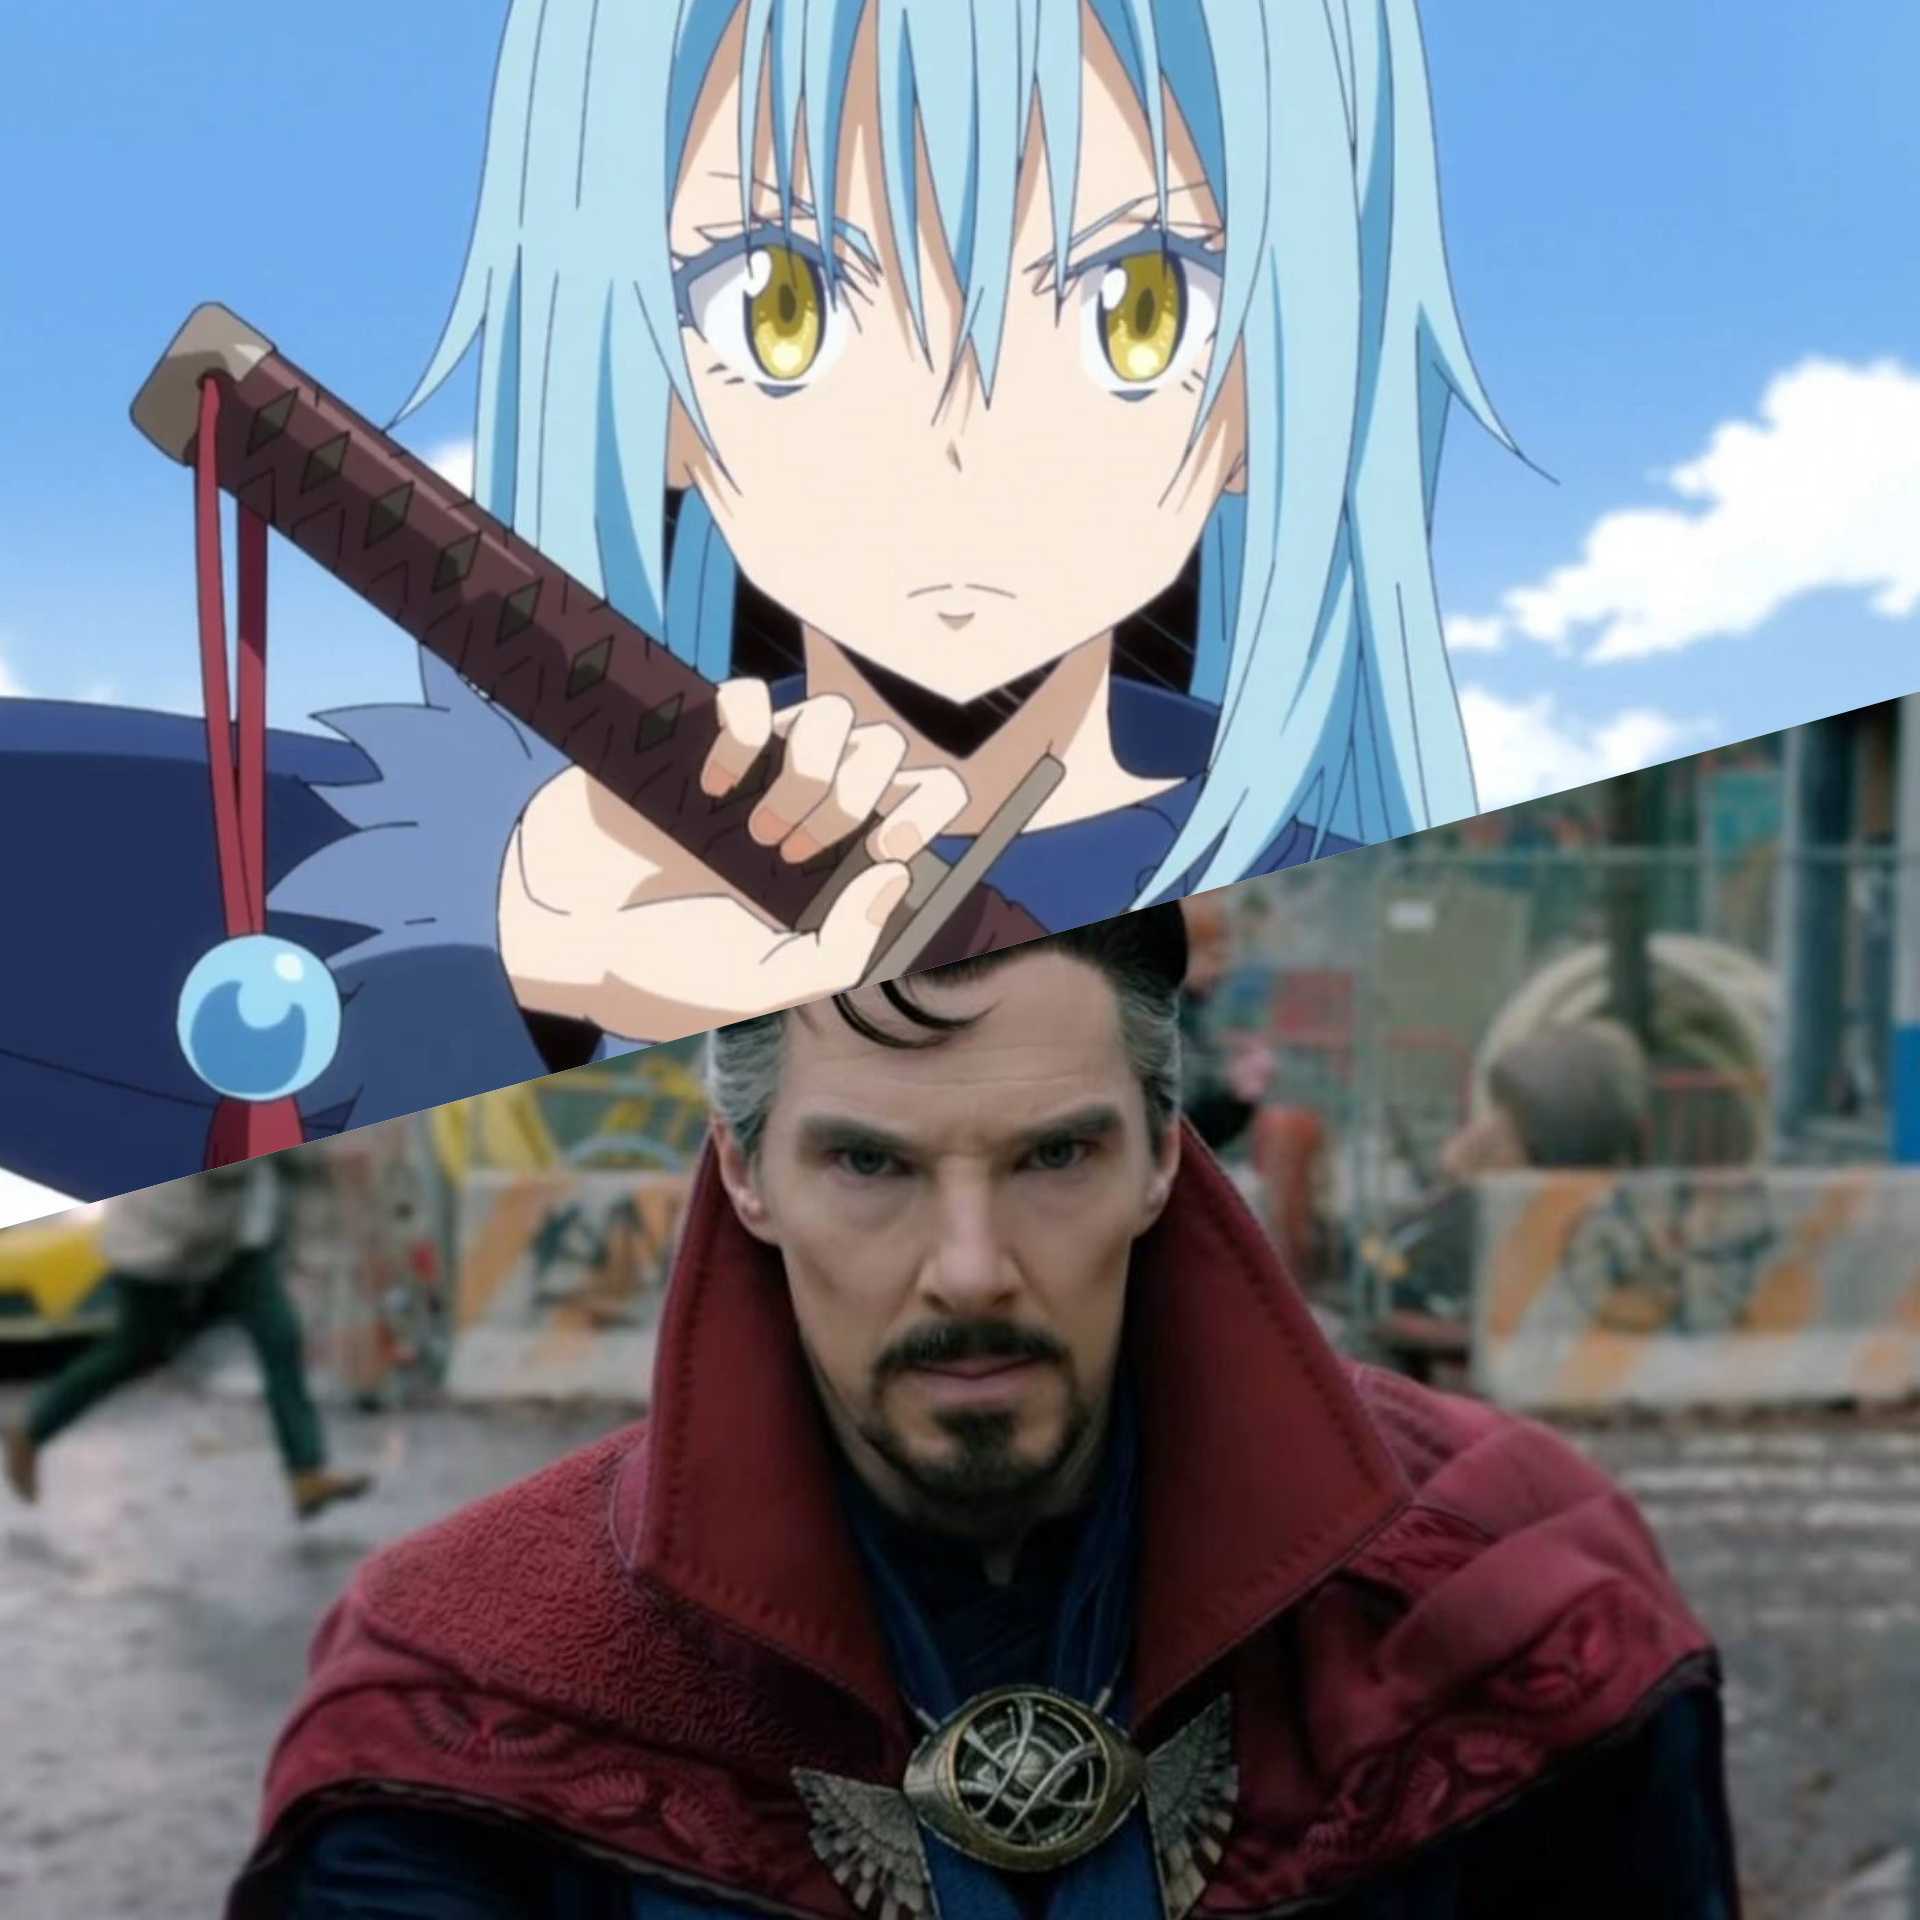 anime character similar to marvel character